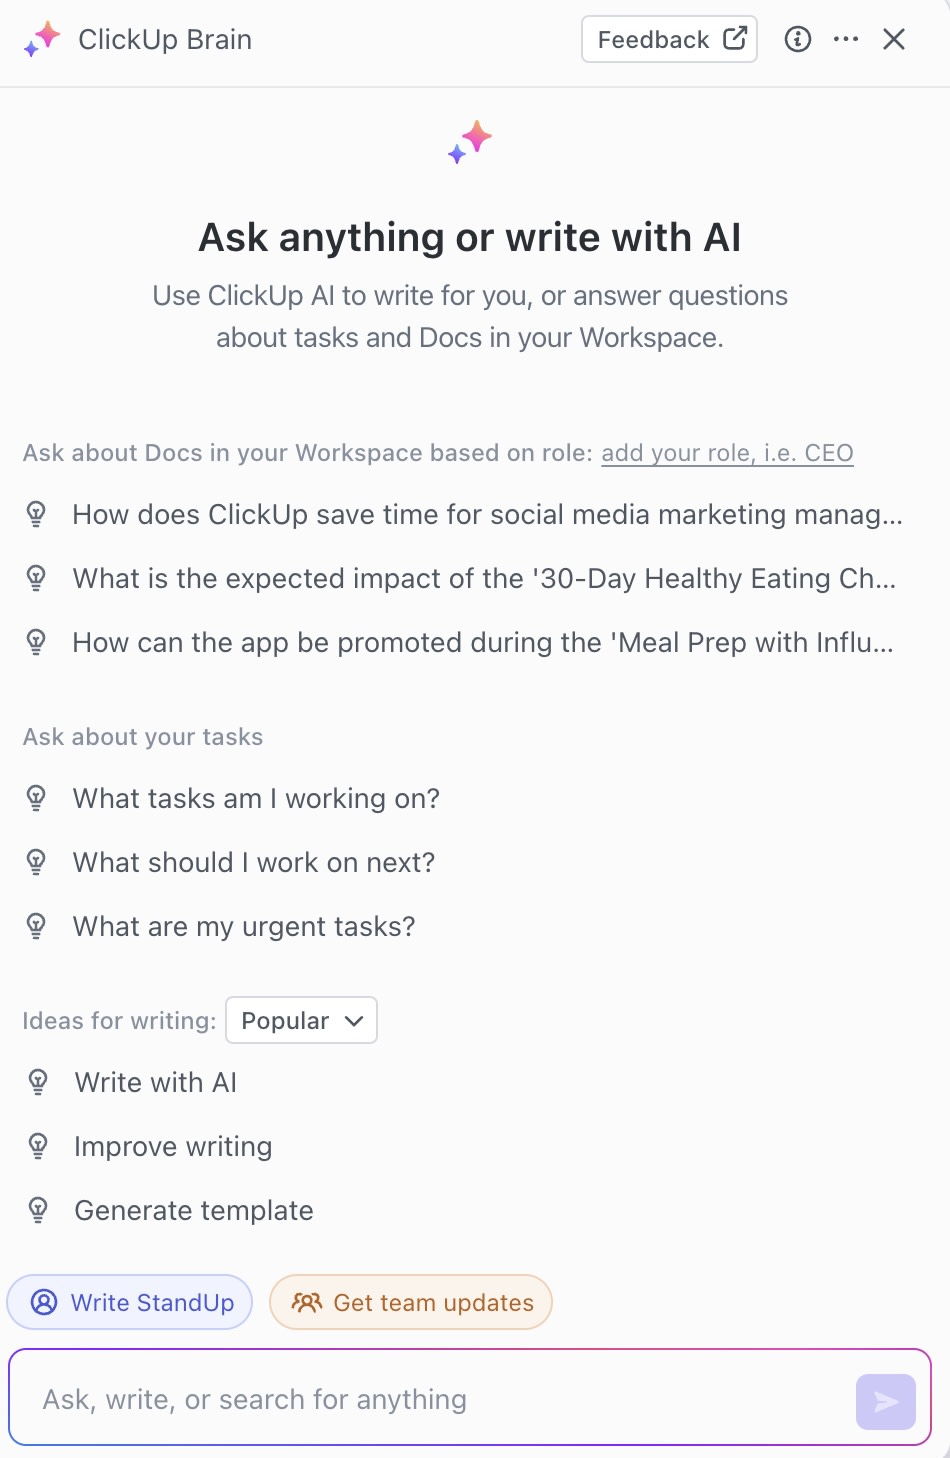 Asana vs. ClickUp: the AI assistant feature in ClickUp